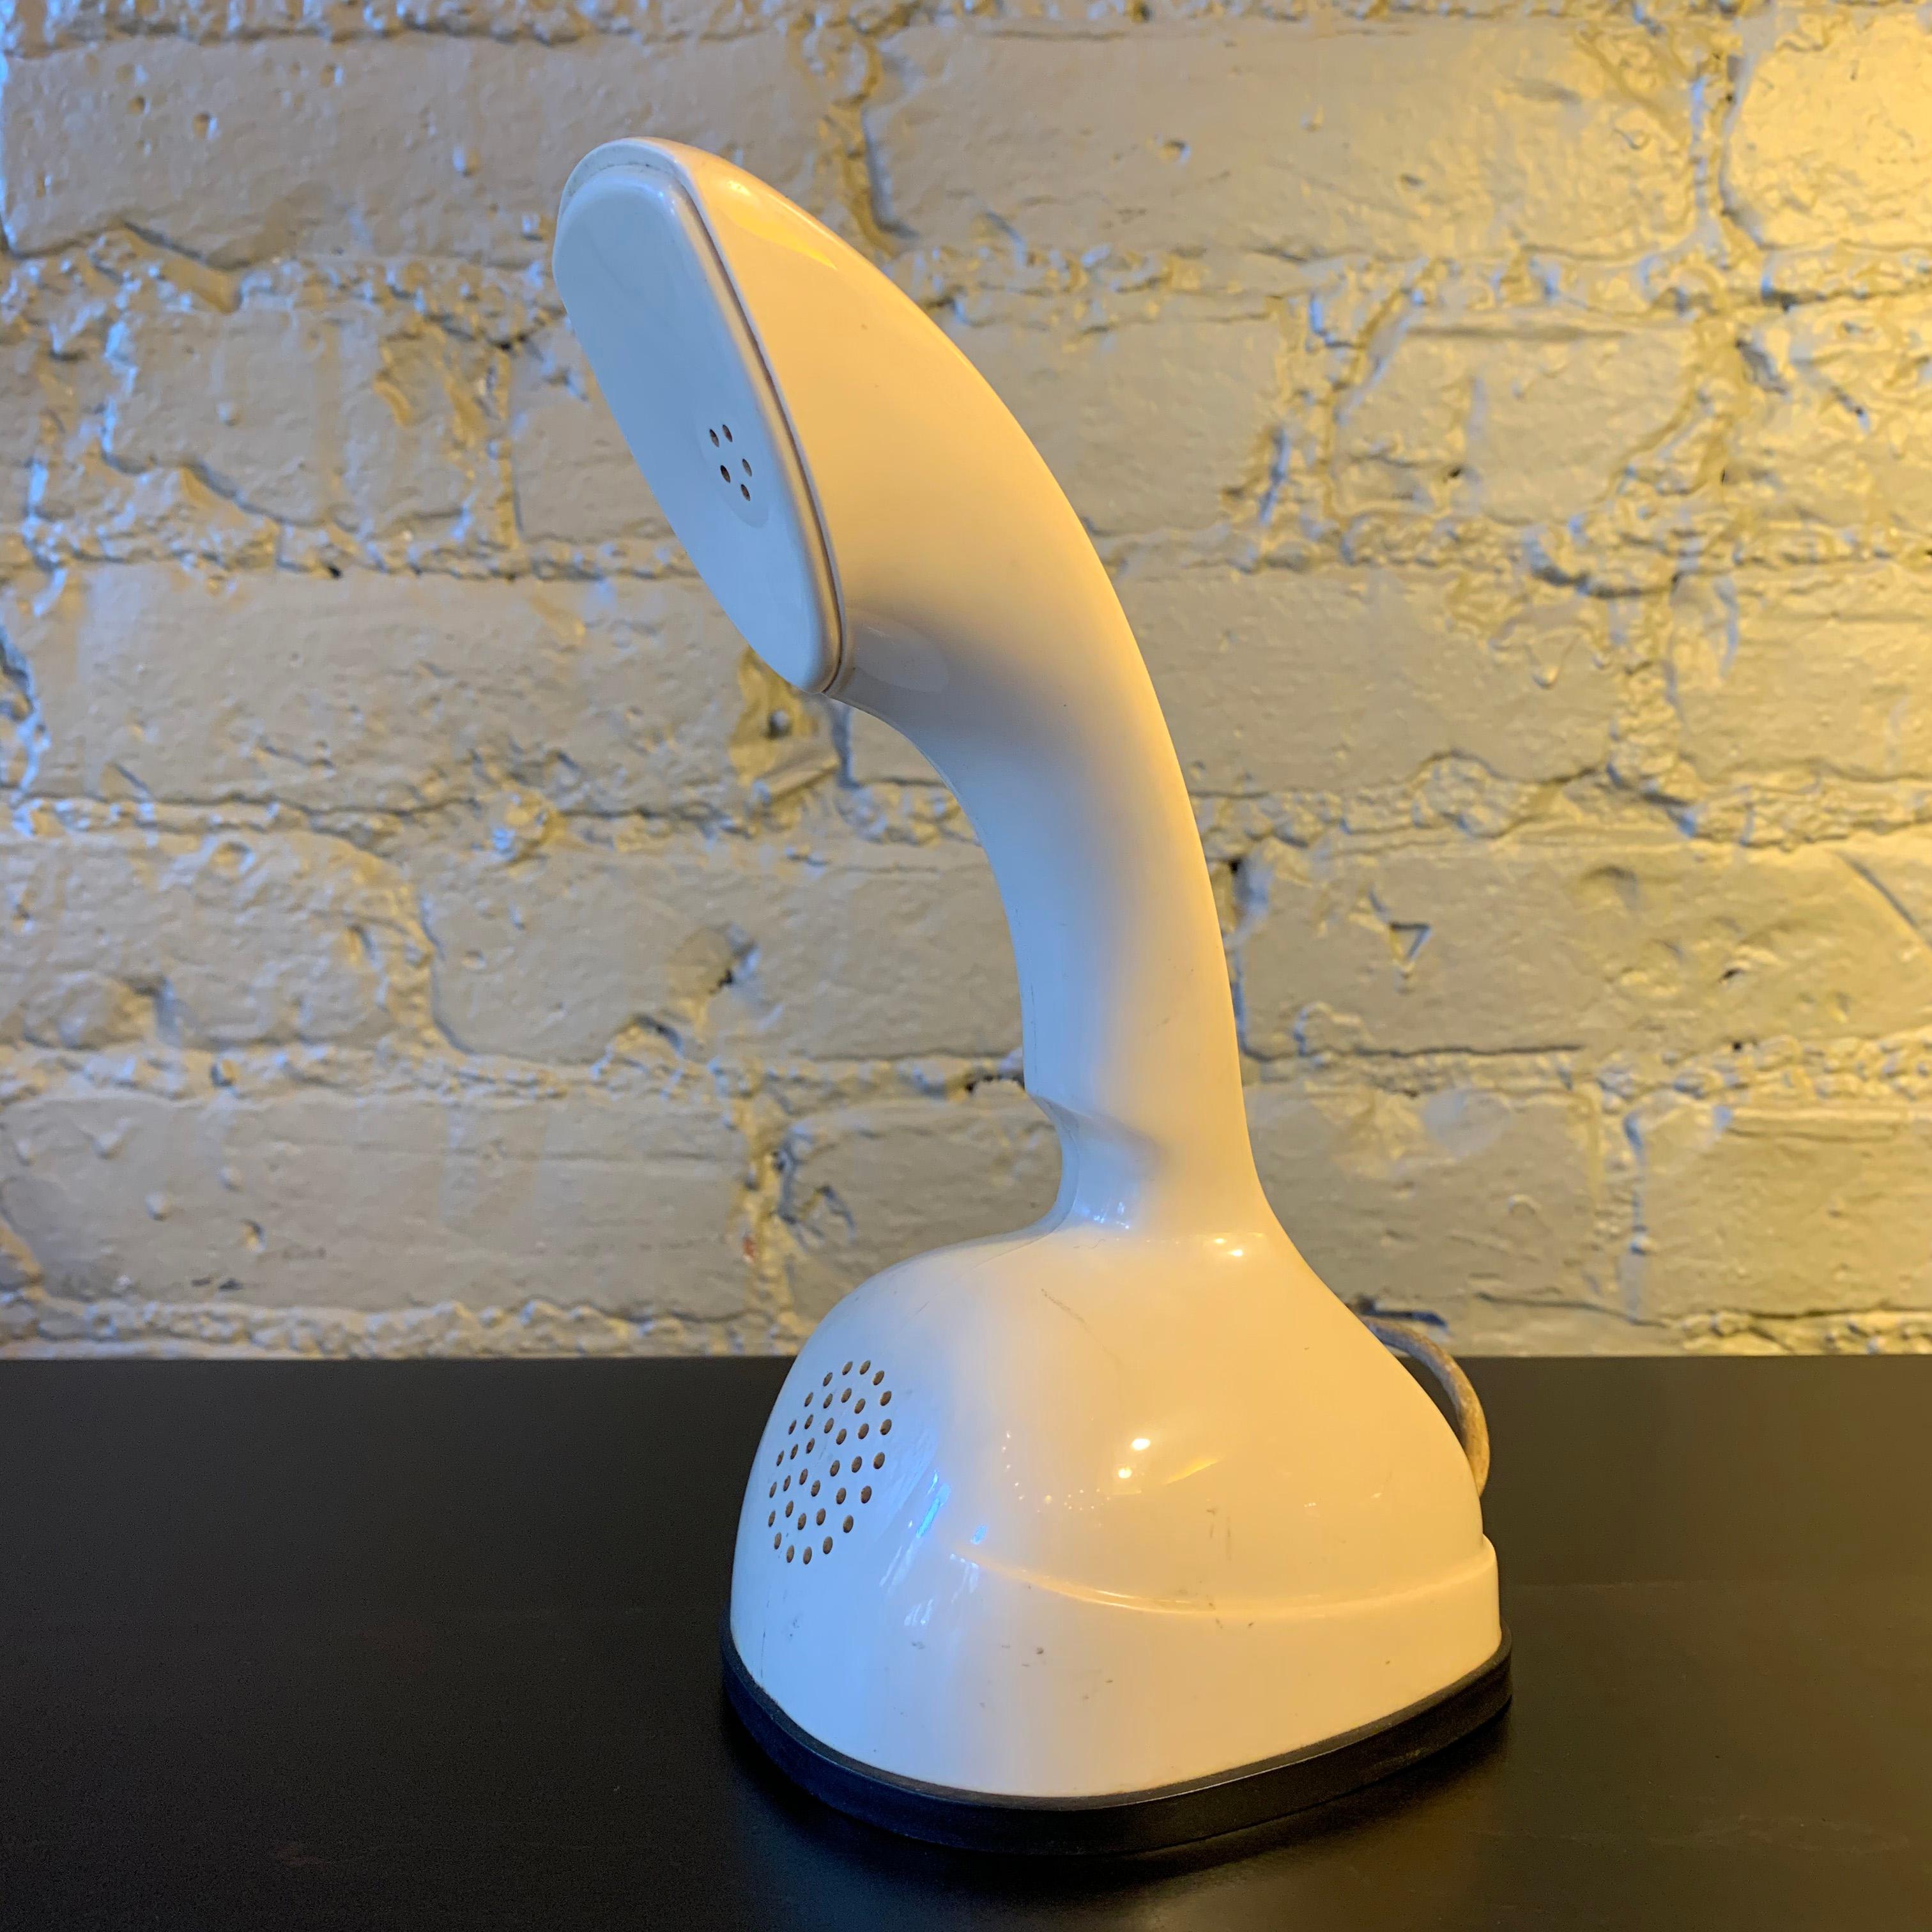 Cream, modern one piece Ericofon telephone created by the Ericsson Company of Sweden and manufactured by North Electric in Galion, Ohio features a rotary dial on the bottom. Due to its styling and its influence on future telephone design, the